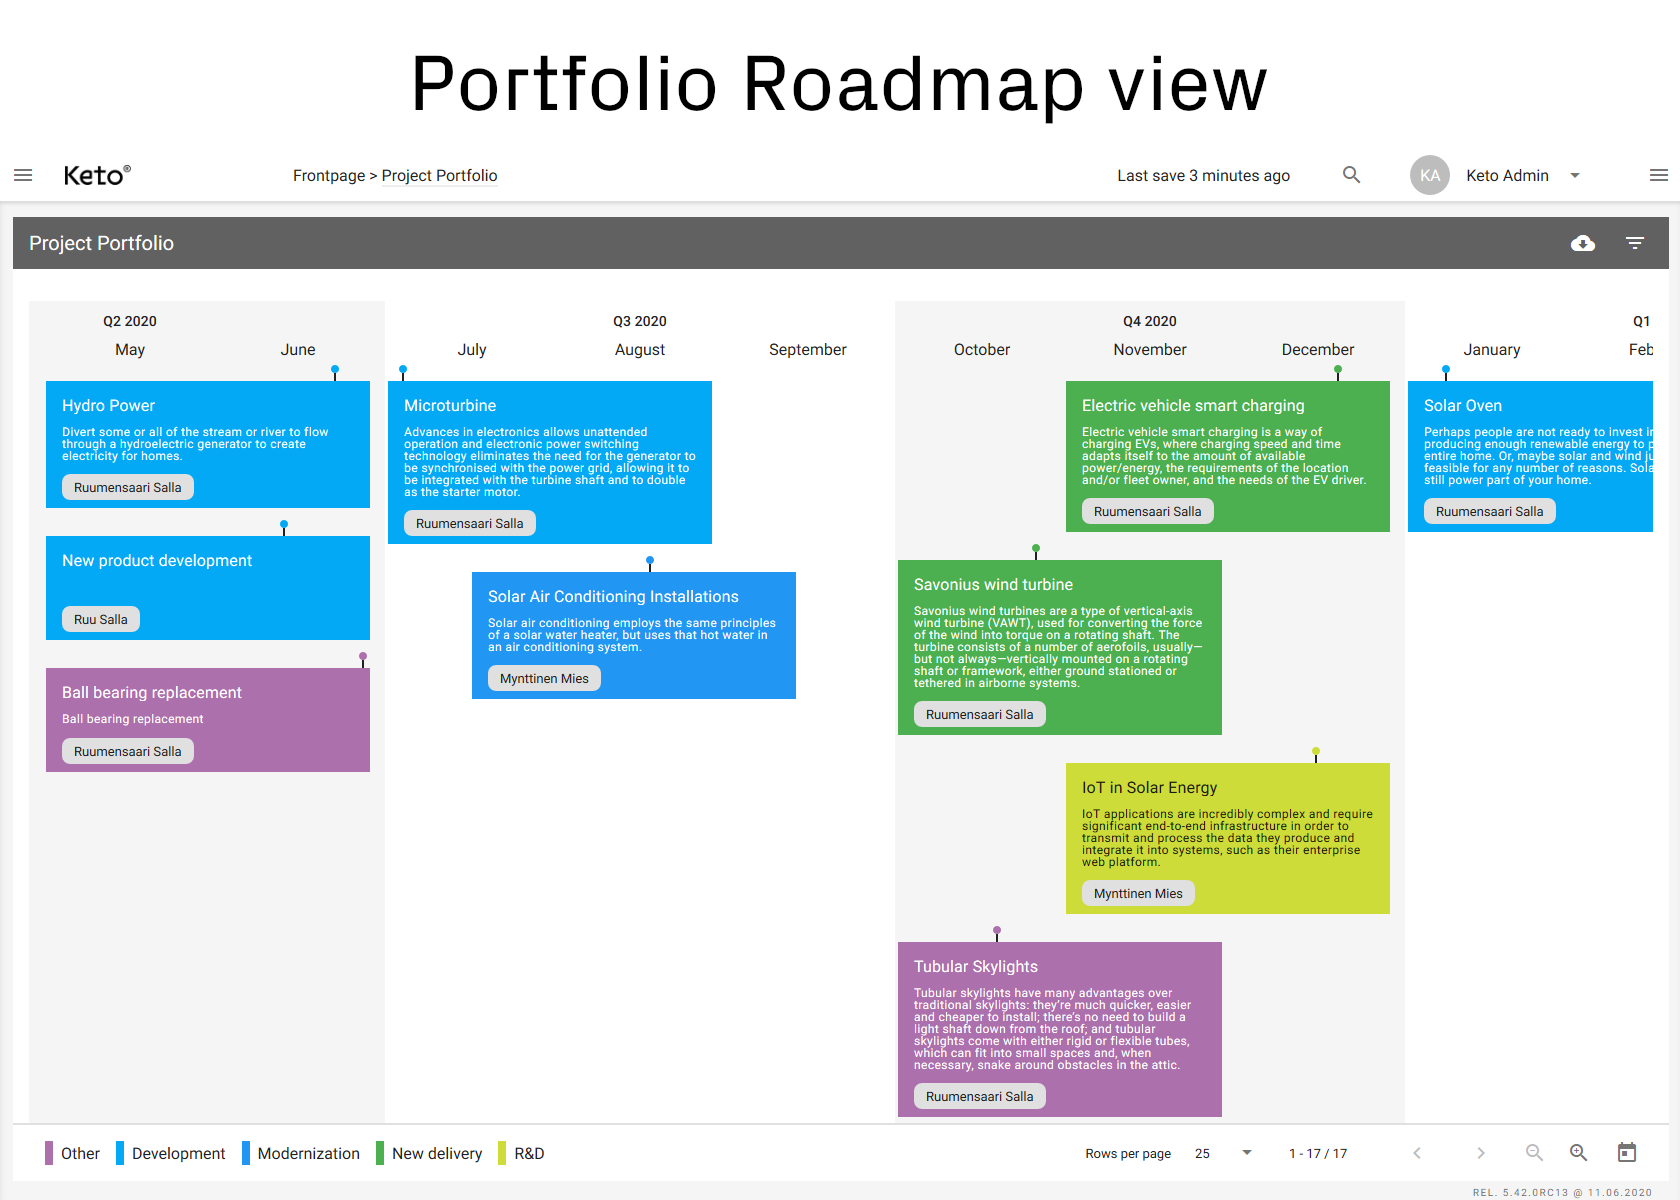 Keto Software - Portfolio as a Roadmap. Gain efficiency, cost transparency, speed up your time-to-market and increase your ROI